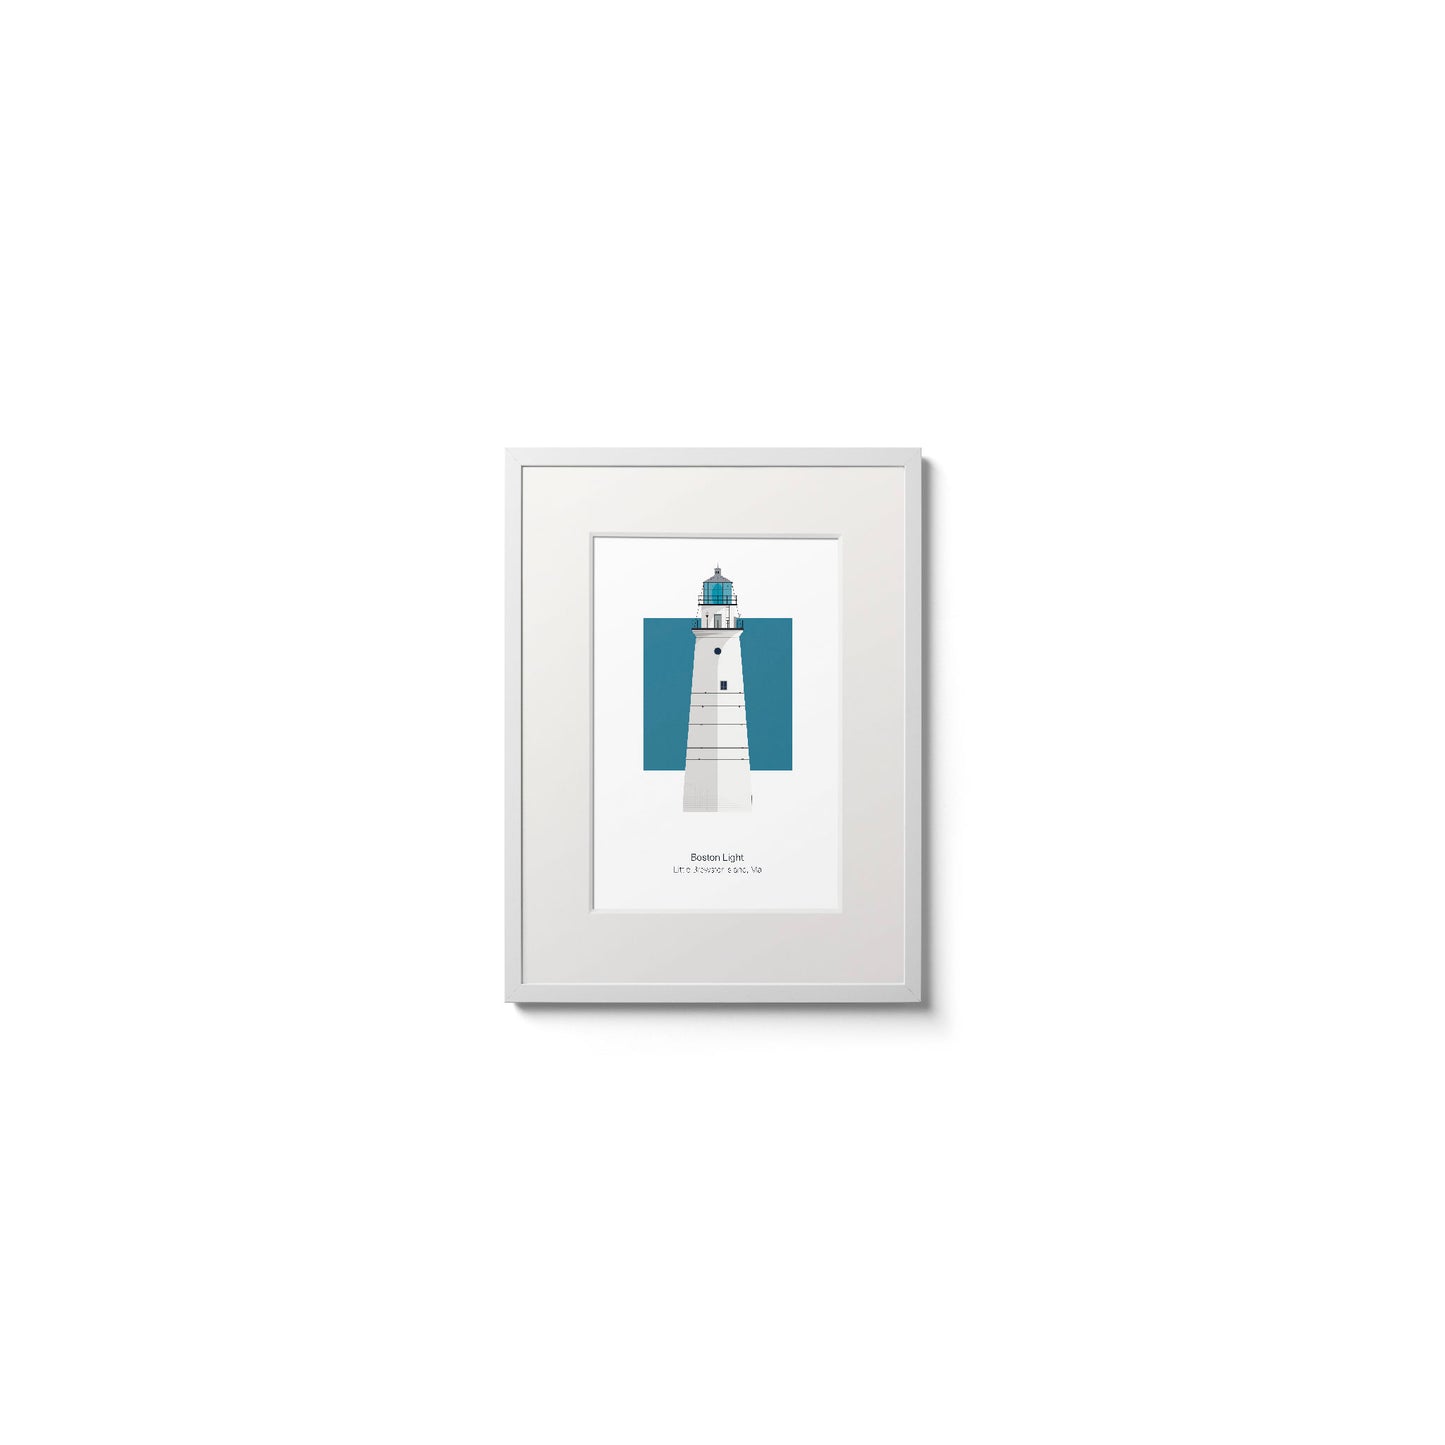 Illustration of the Boston Light, Massachusetts, USA. On a white background with aqua blue square as a backdrop., in a white frame  and measuring 6"x8" (15x20cm).